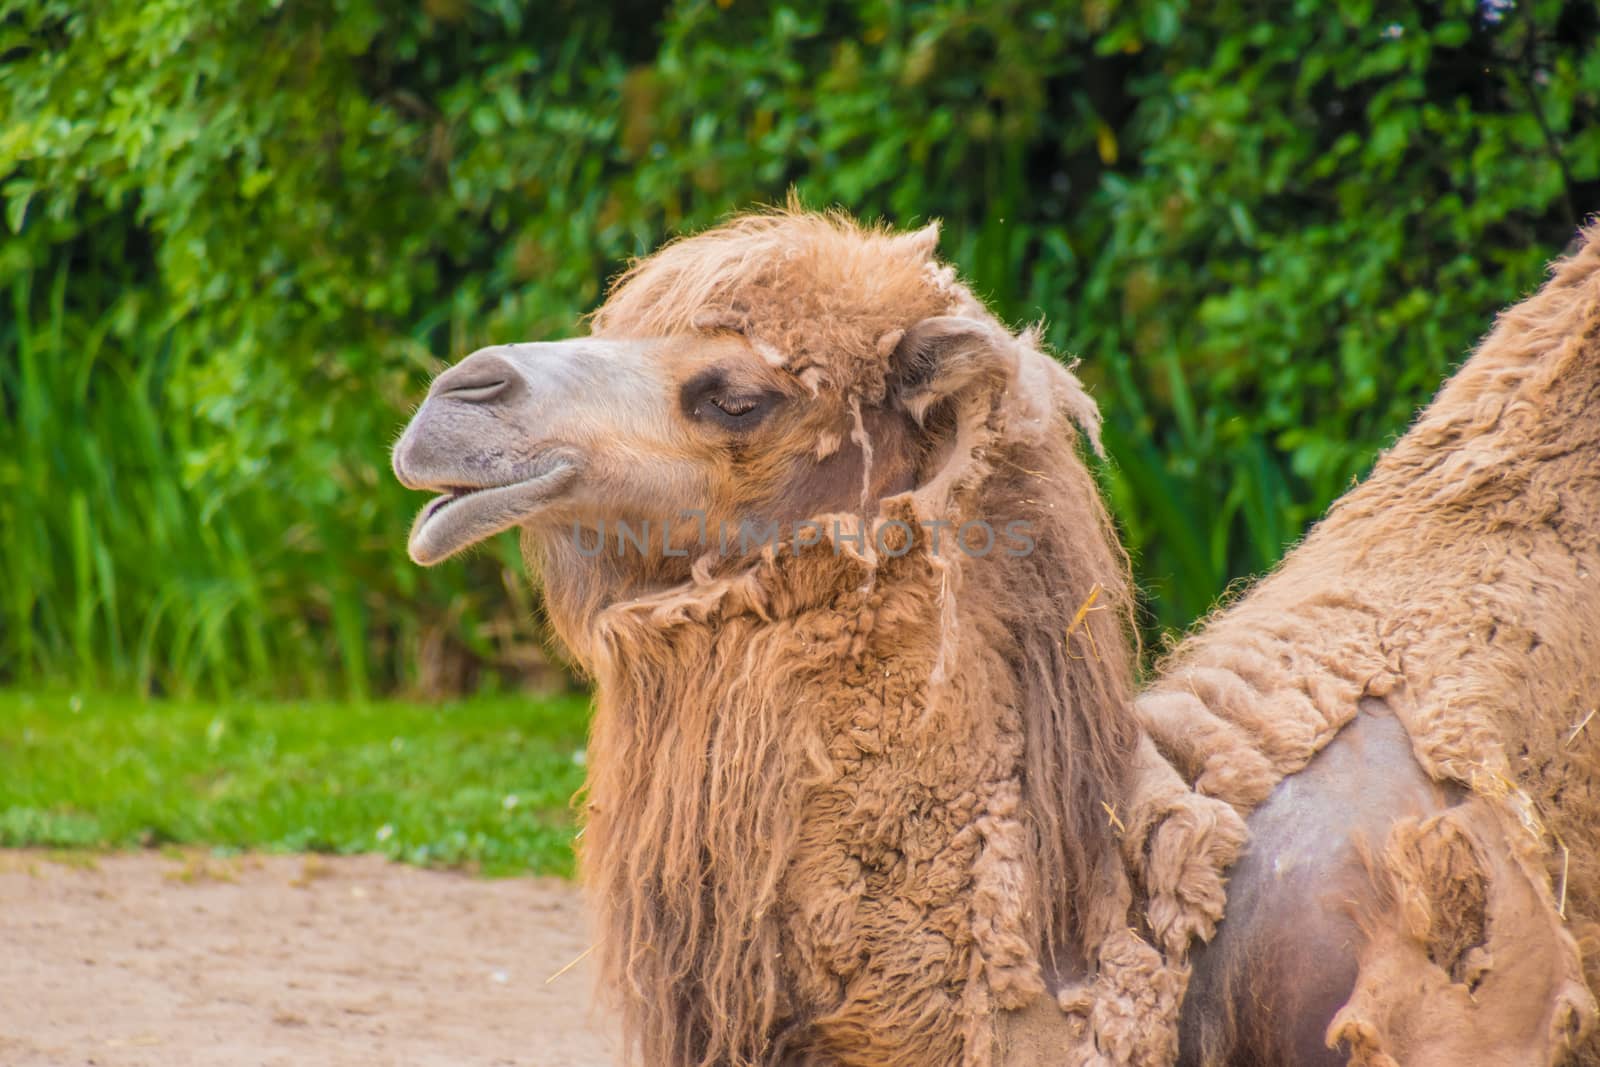 Camel dromedary two humps brown fluffy brown fur eating hay